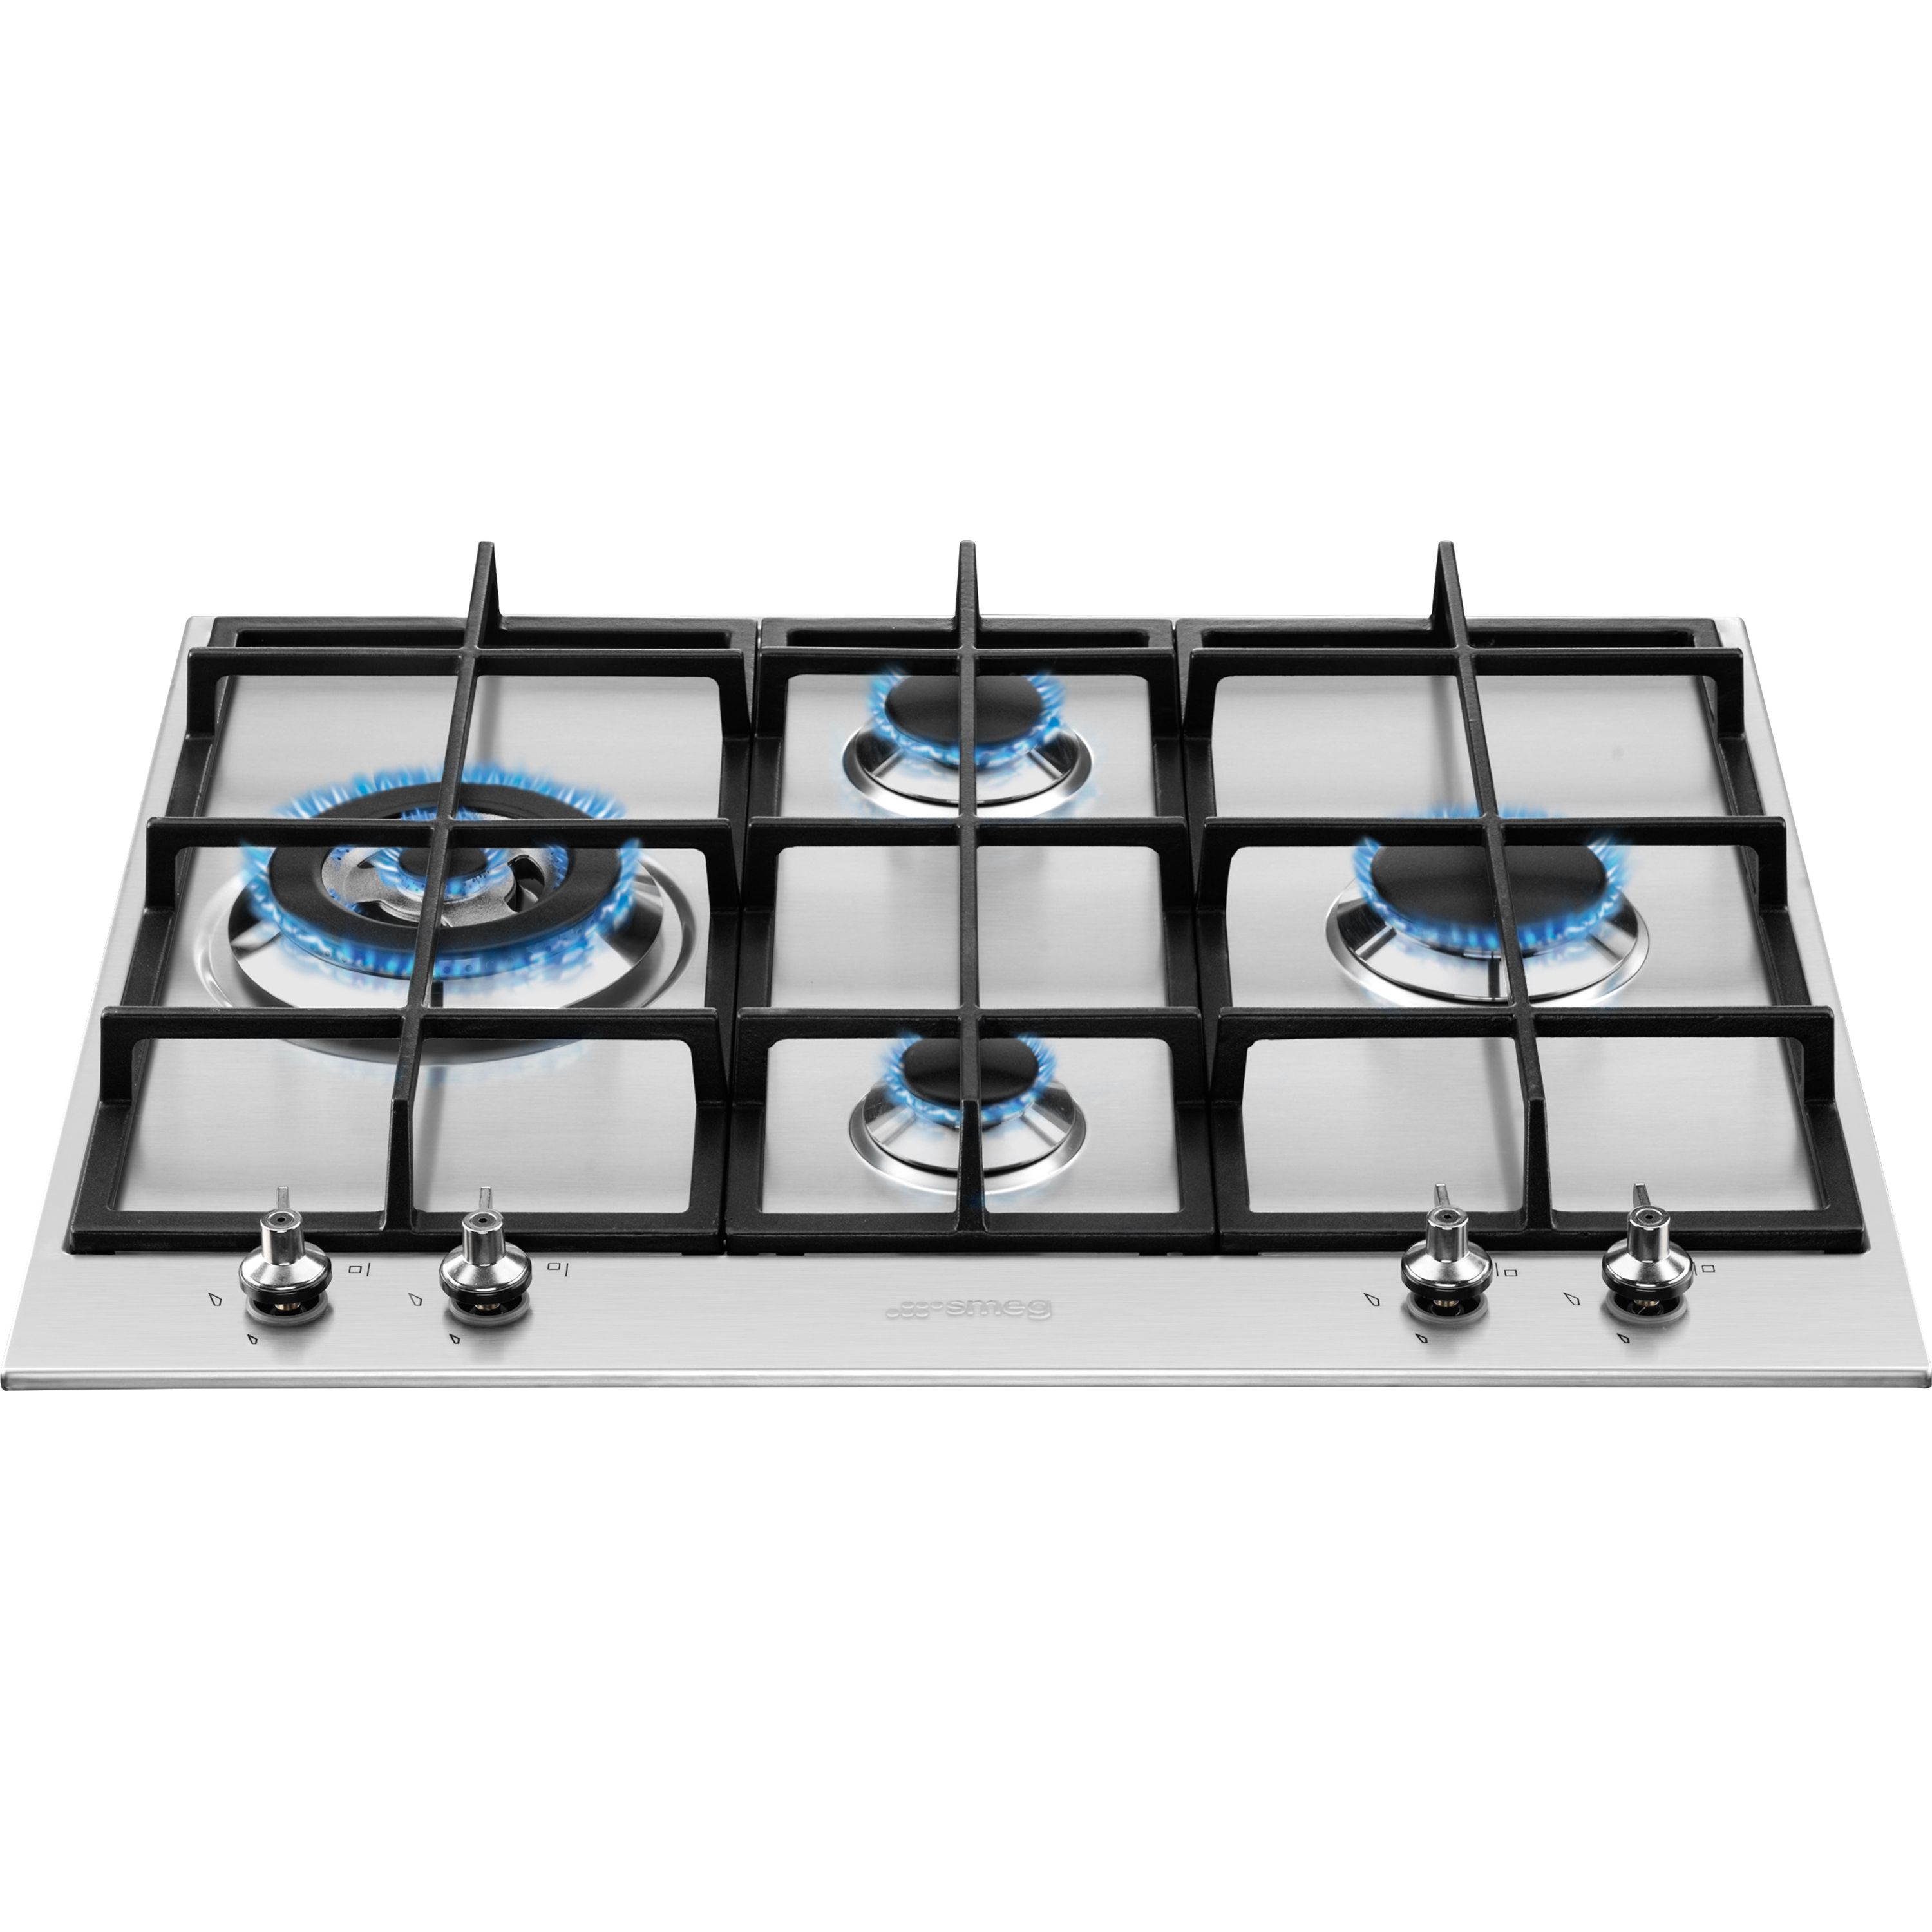 Smeg AOSF6390G3 Built-in Single Electric oven & gas hob pack - Stainless steel